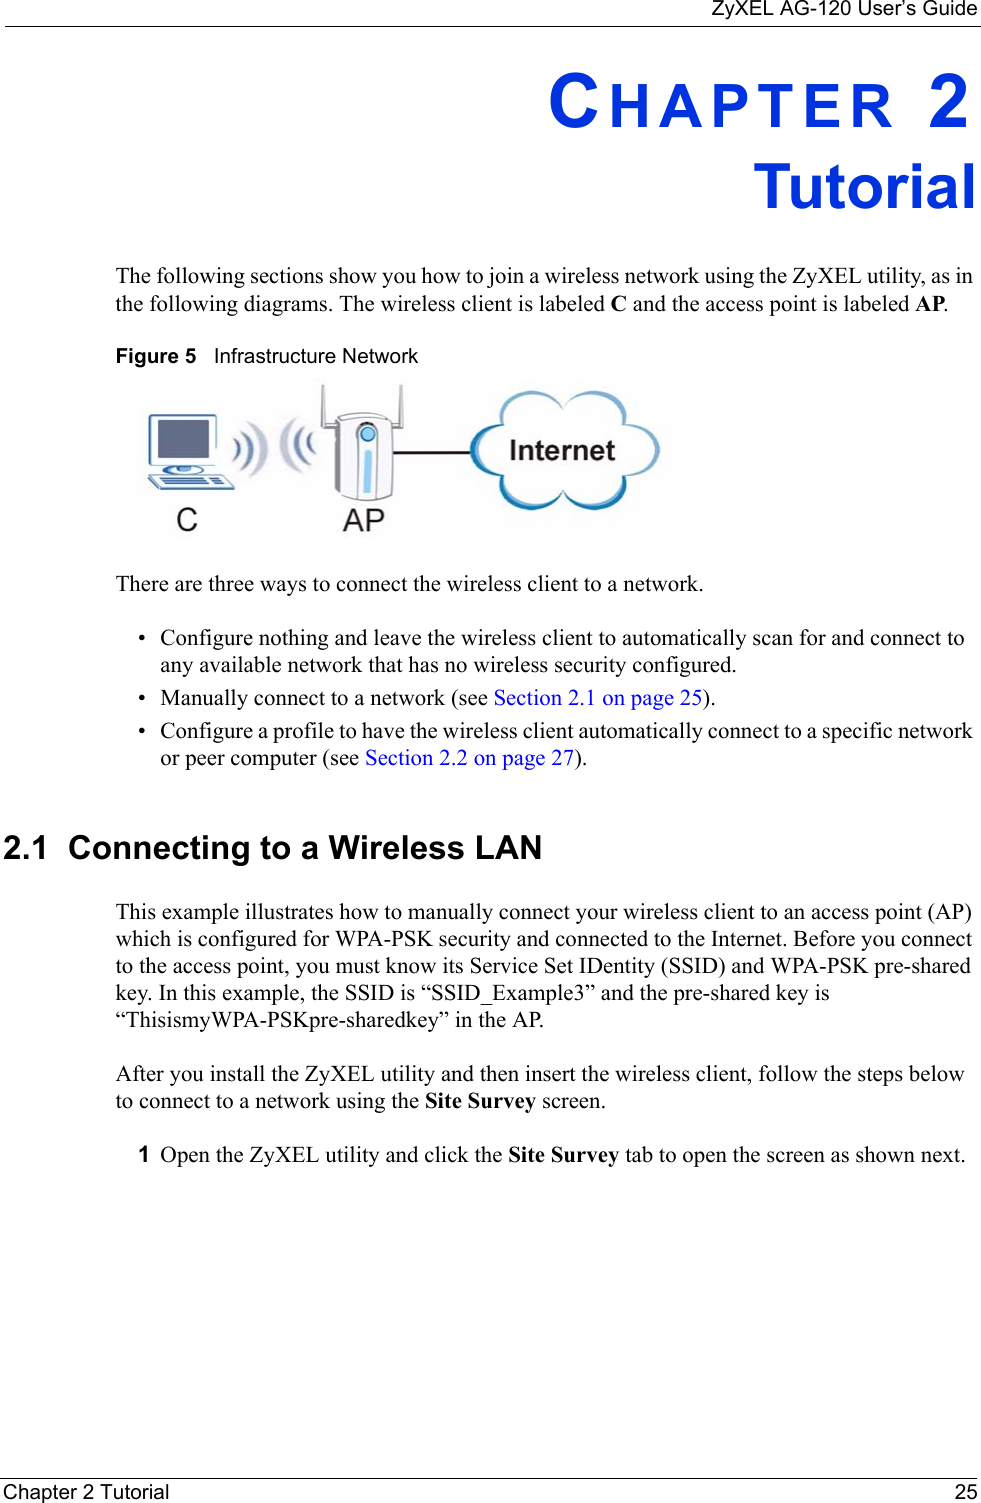 ZyXEL AG-120 User’s GuideChapter 2 Tutorial 25CHAPTER 2TutorialThe following sections show you how to join a wireless network using the ZyXEL utility, as in the following diagrams. The wireless client is labeled C and the access point is labeled AP. Figure 5   Infrastructure NetworkThere are three ways to connect the wireless client to a network.• Configure nothing and leave the wireless client to automatically scan for and connect to any available network that has no wireless security configured.• Manually connect to a network (see Section 2.1 on page 25).• Configure a profile to have the wireless client automatically connect to a specific network or peer computer (see Section 2.2 on page 27). 2.1  Connecting to a Wireless LAN This example illustrates how to manually connect your wireless client to an access point (AP) which is configured for WPA-PSK security and connected to the Internet. Before you connect to the access point, you must know its Service Set IDentity (SSID) and WPA-PSK pre-shared key. In this example, the SSID is “SSID_Example3” and the pre-shared key is “ThisismyWPA-PSKpre-sharedkey” in the AP. After you install the ZyXEL utility and then insert the wireless client, follow the steps below to connect to a network using the Site Survey screen. 1Open the ZyXEL utility and click the Site Survey tab to open the screen as shown next.